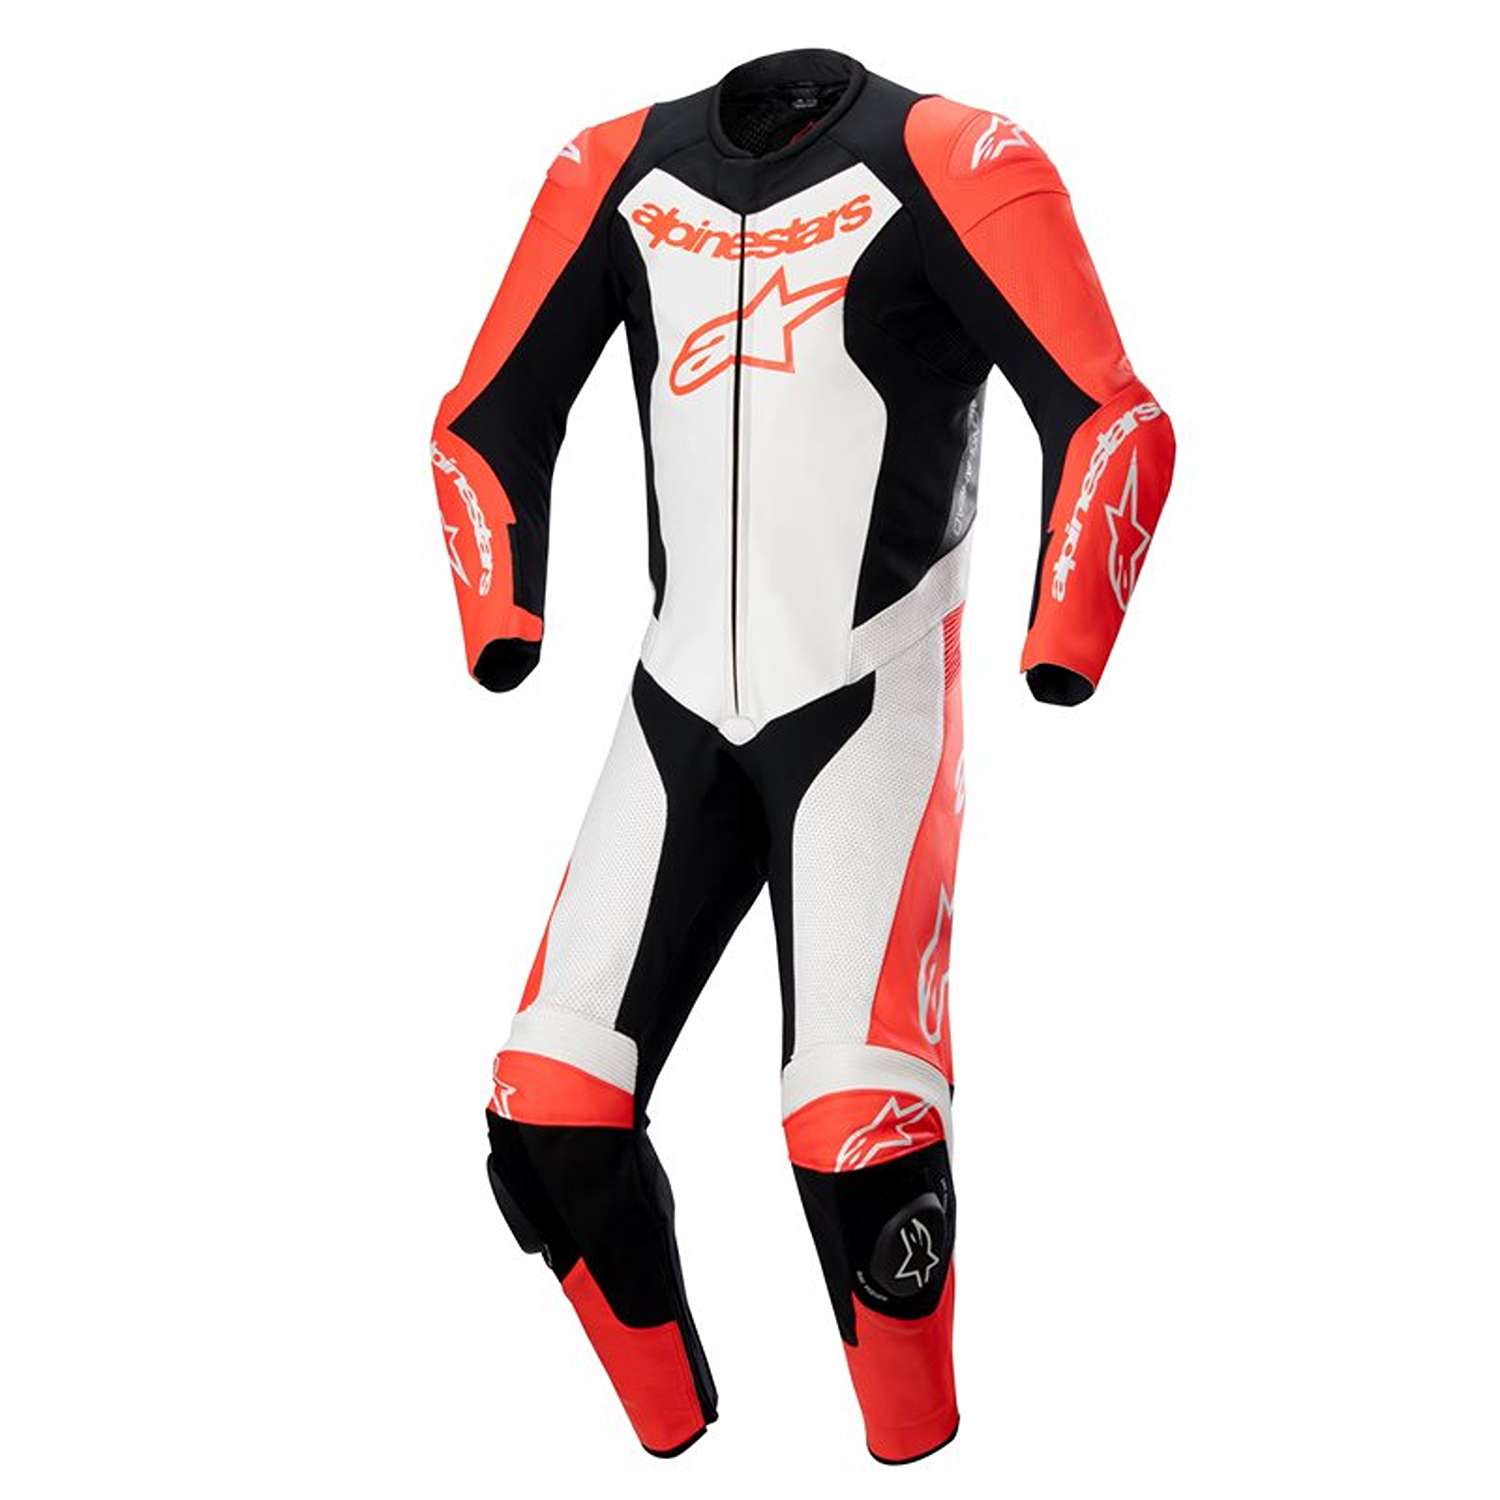 Image of Alpinestars Gp Force Lurv 1Pc Leather Suit Red Fluo White Black Size 54 ID 8059347340388